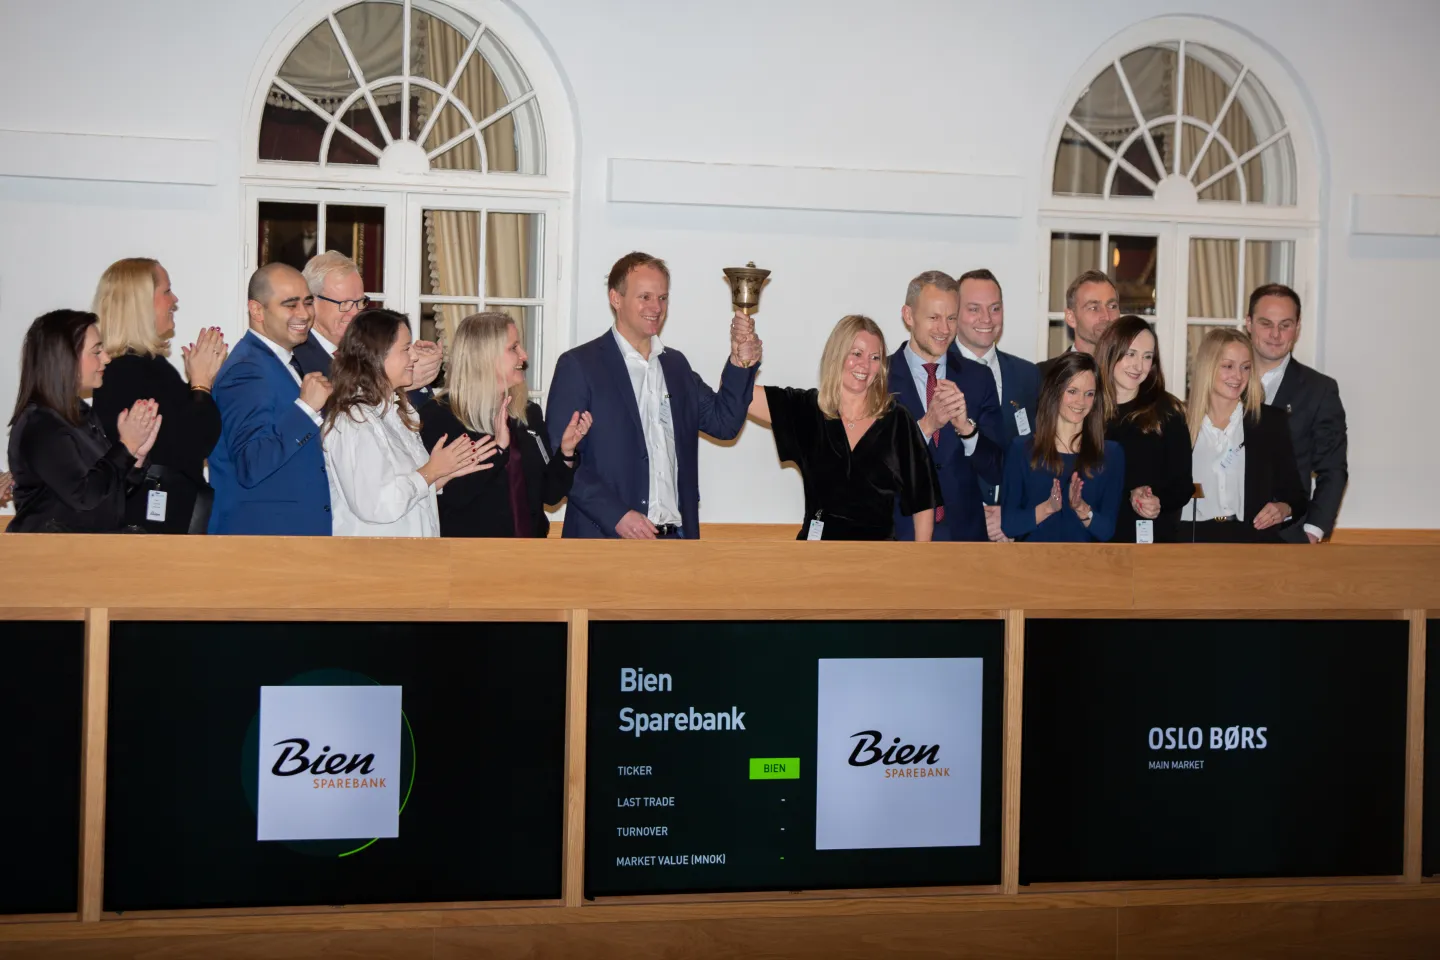 Lena Jørundland, CEO of Bien Sparebank, and Bendick Falch-Koslung, Chair of the Board, rang the bell this morning to celebrate the company’s listing on the Oslo Børs main market. They were welcomed by Eirik Høiby Ausland, Head of Nordic Listing at Oslo Børs (Photo: Chris Fey/ NTB)